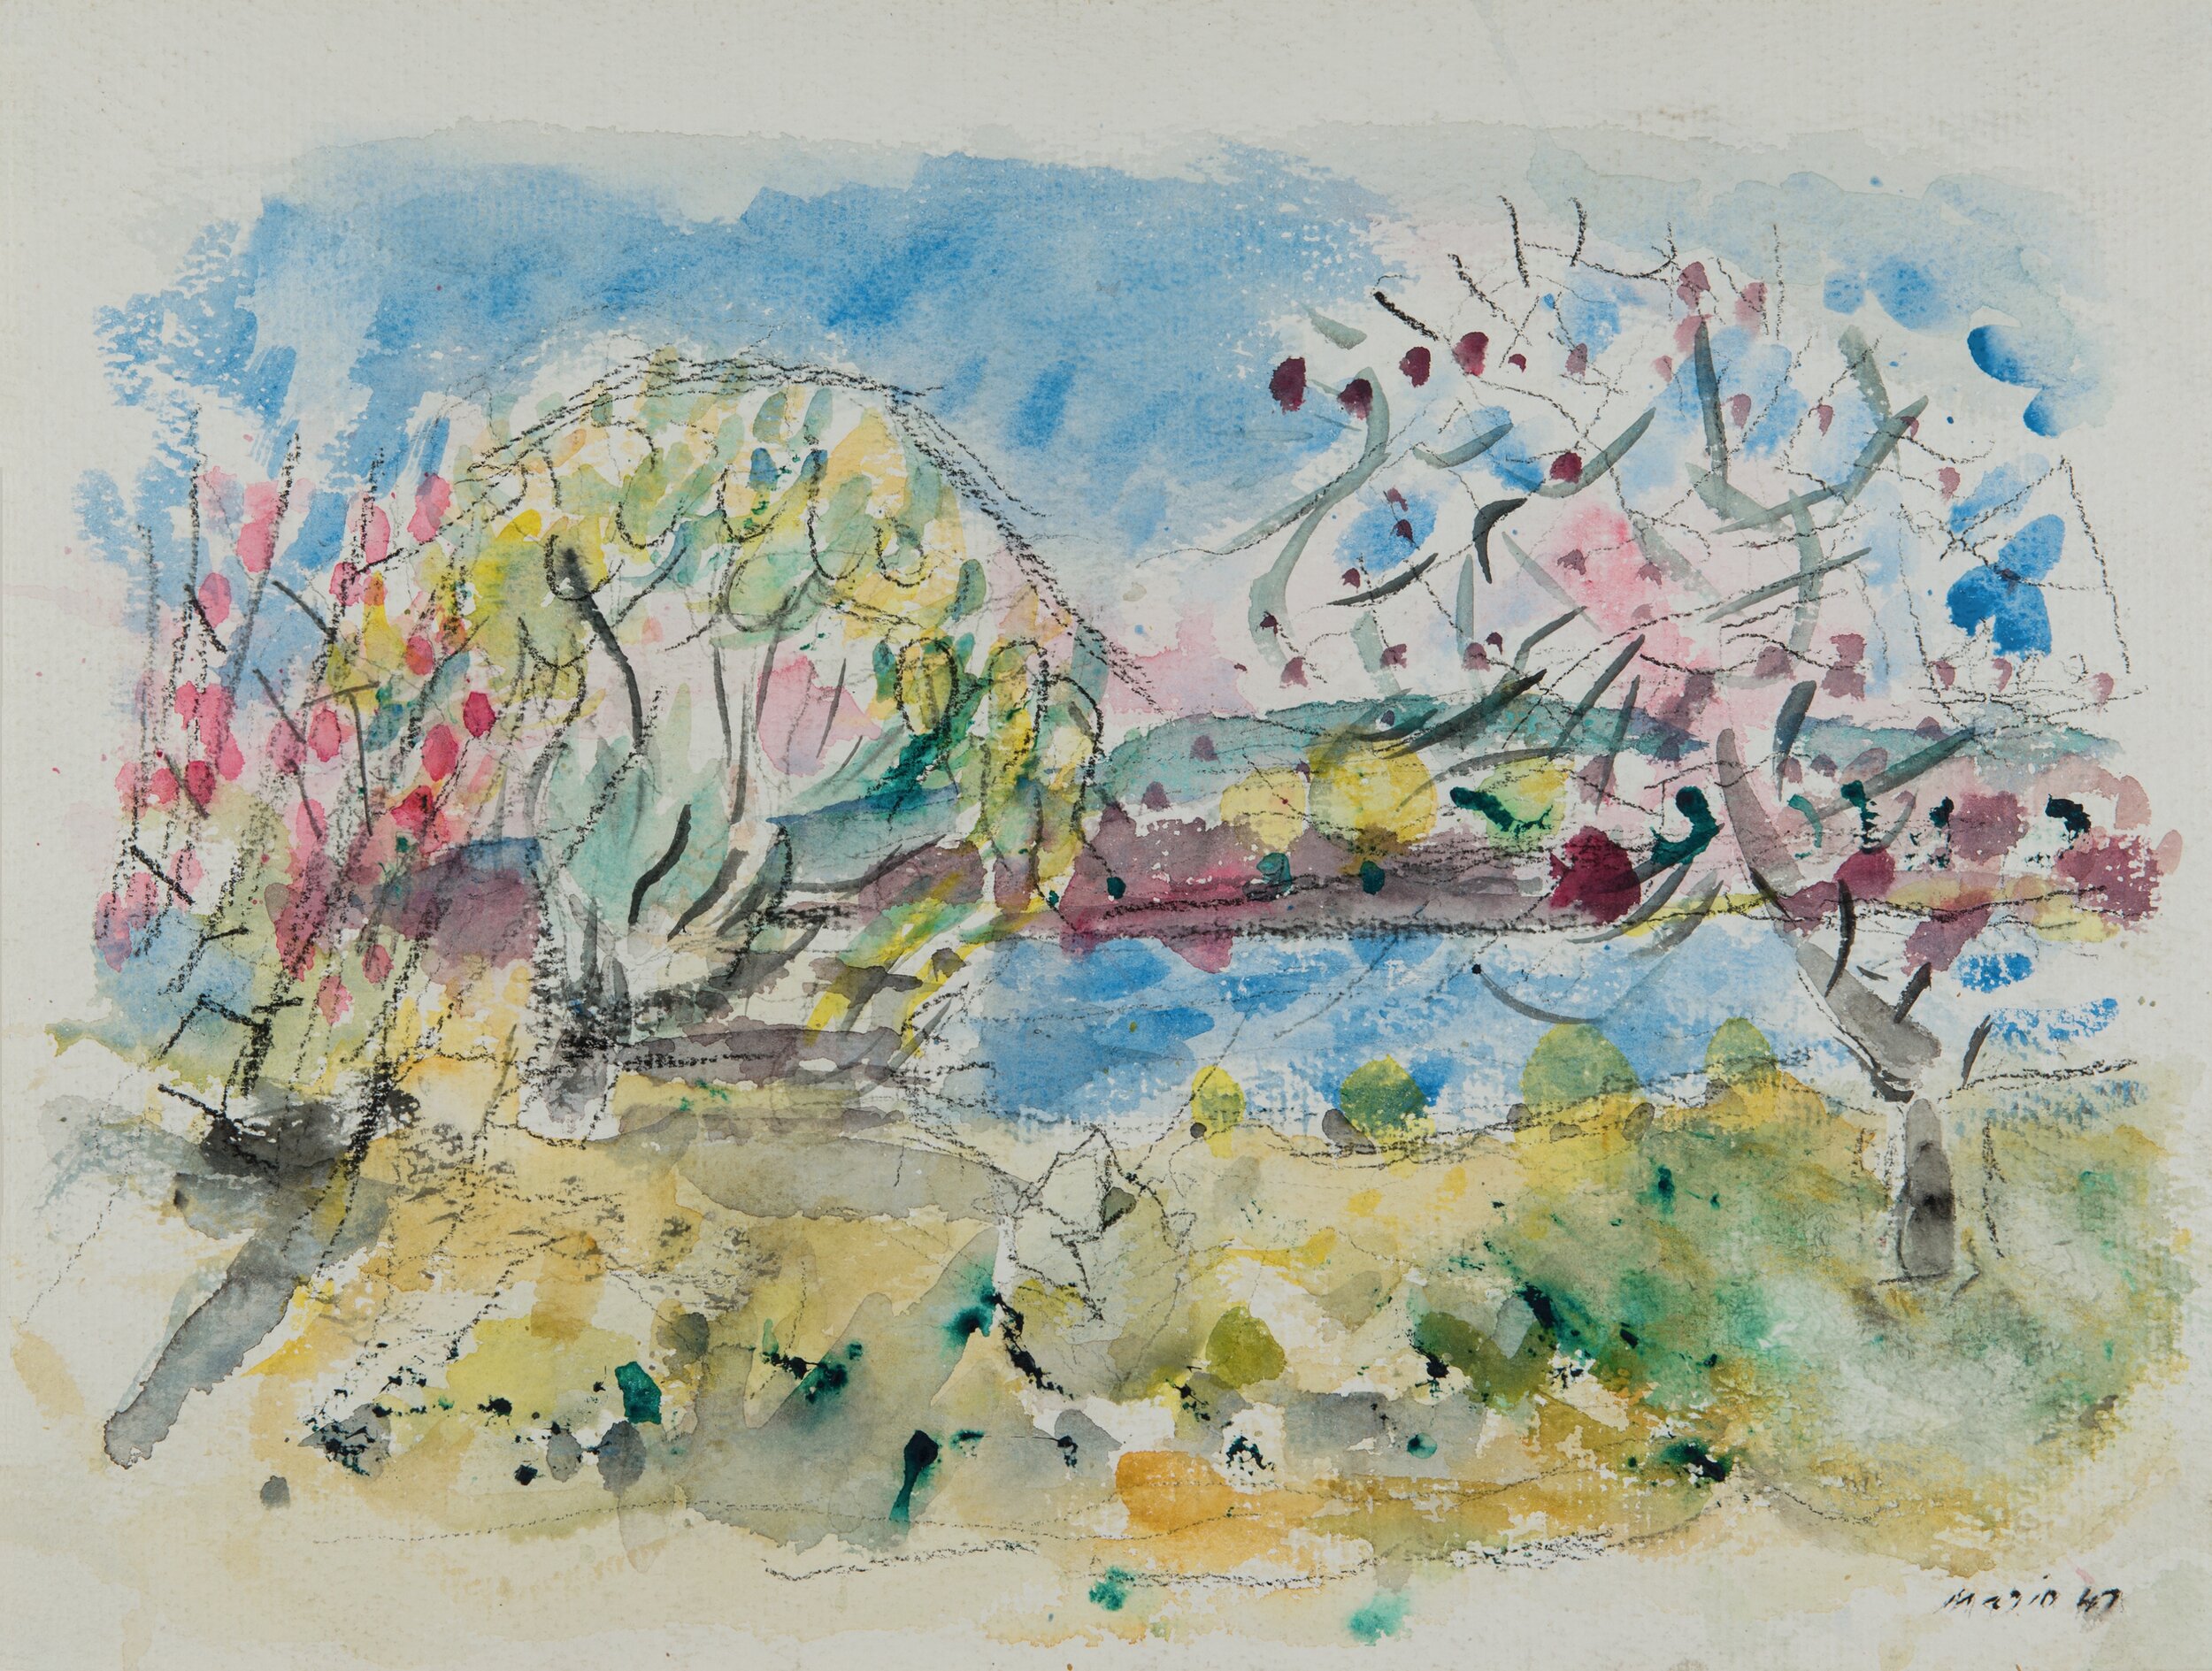 Watercolor of trees with pink blooms by the riverside on a blue-sky spring day